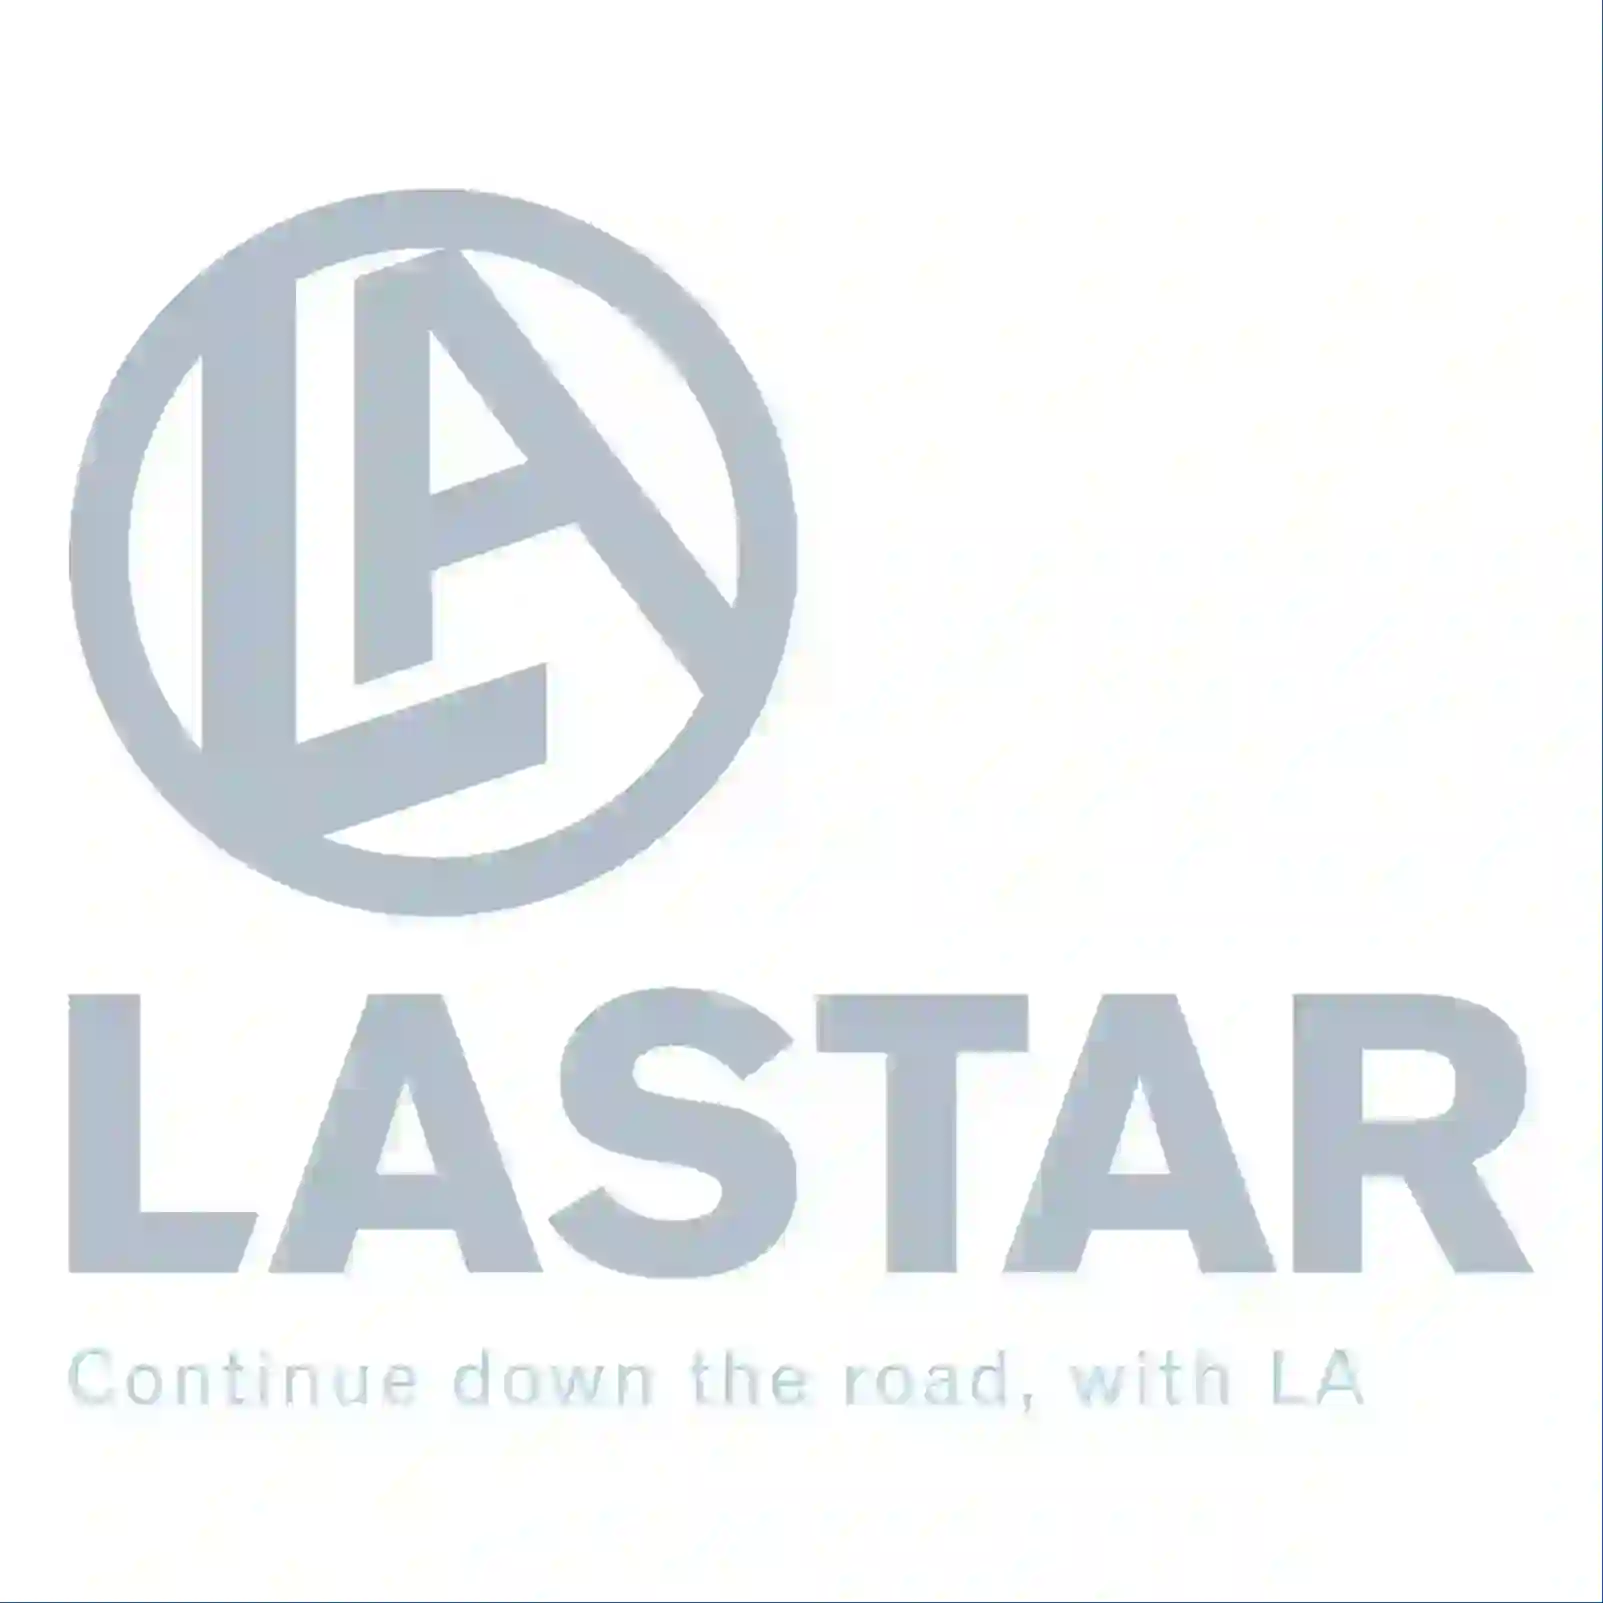  Spring, cabin shock absorber || Lastar Spare Part | Truck Spare Parts, Auotomotive Spare Parts